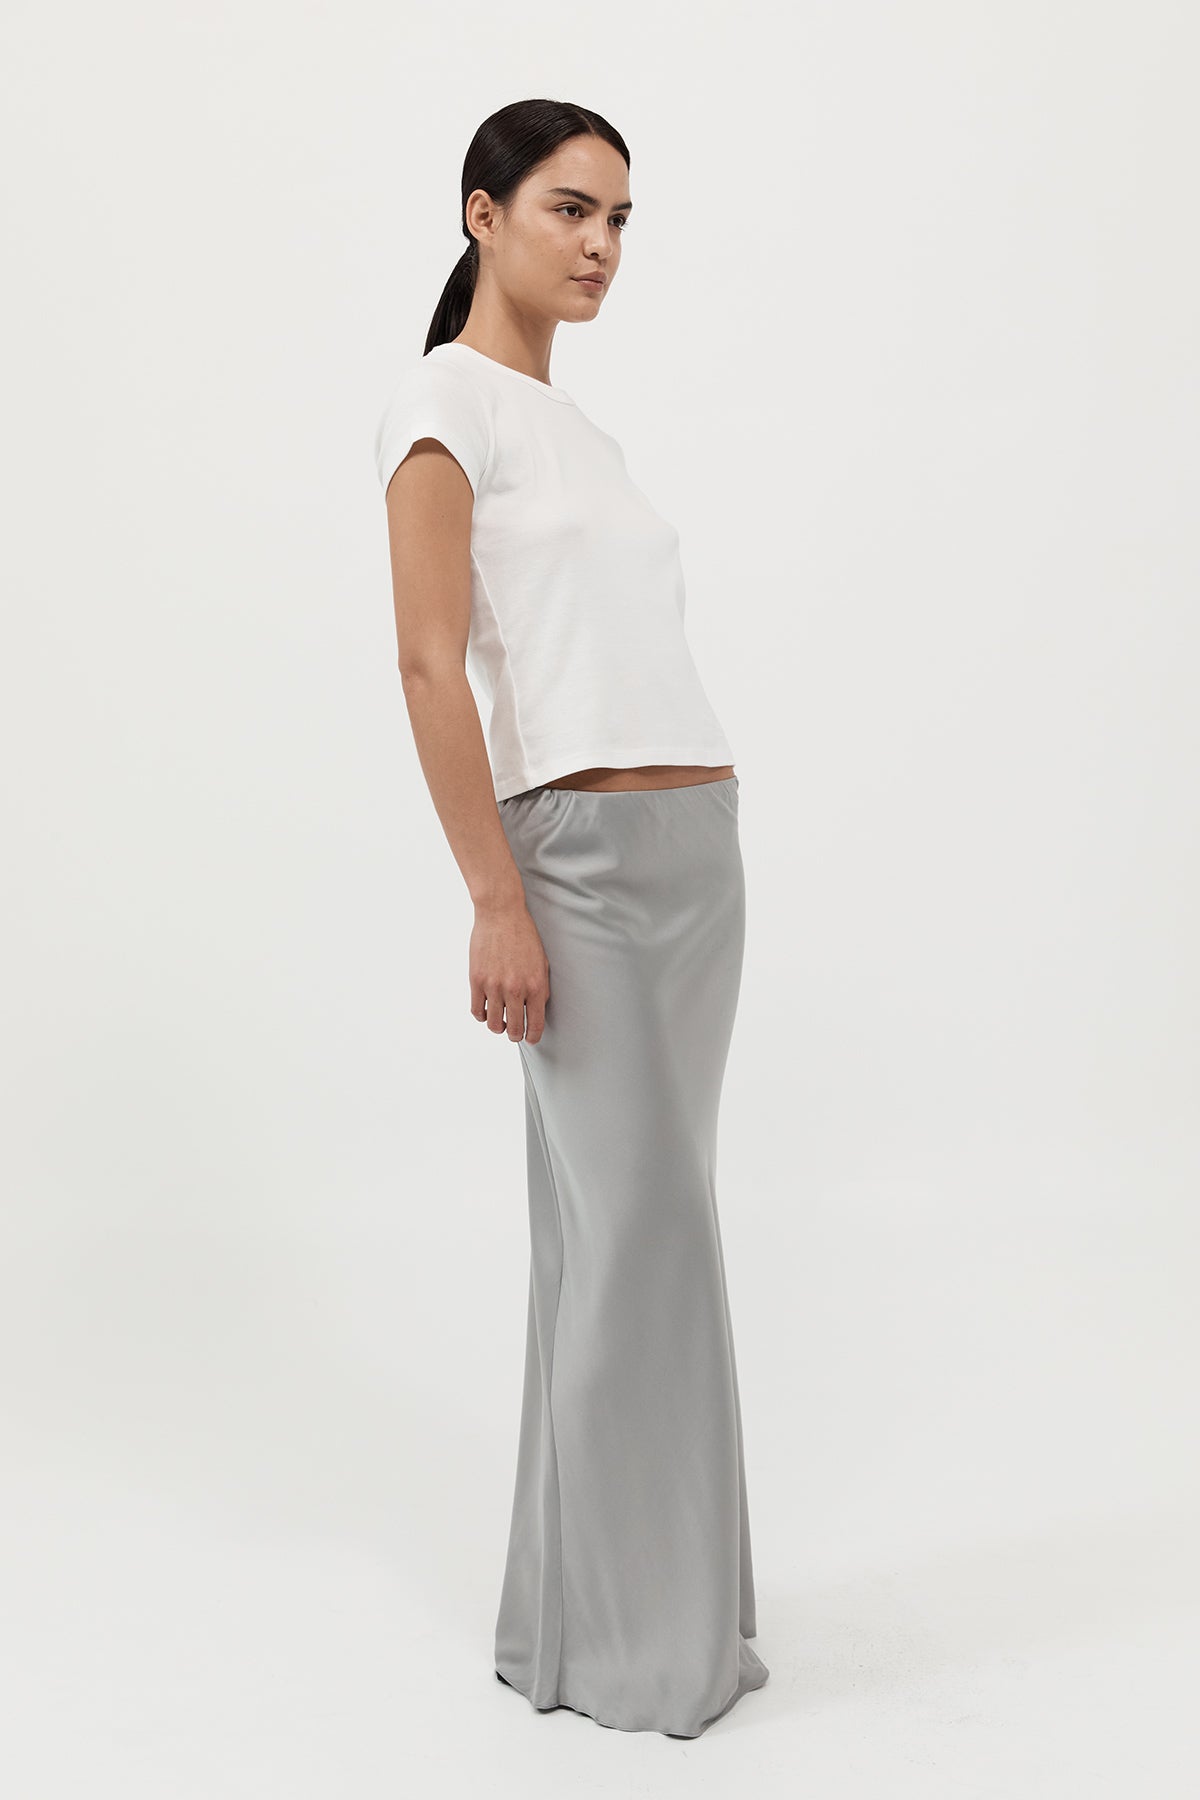 The St Agni Bias Slip Skirt in Silver available at The New Trend Australia